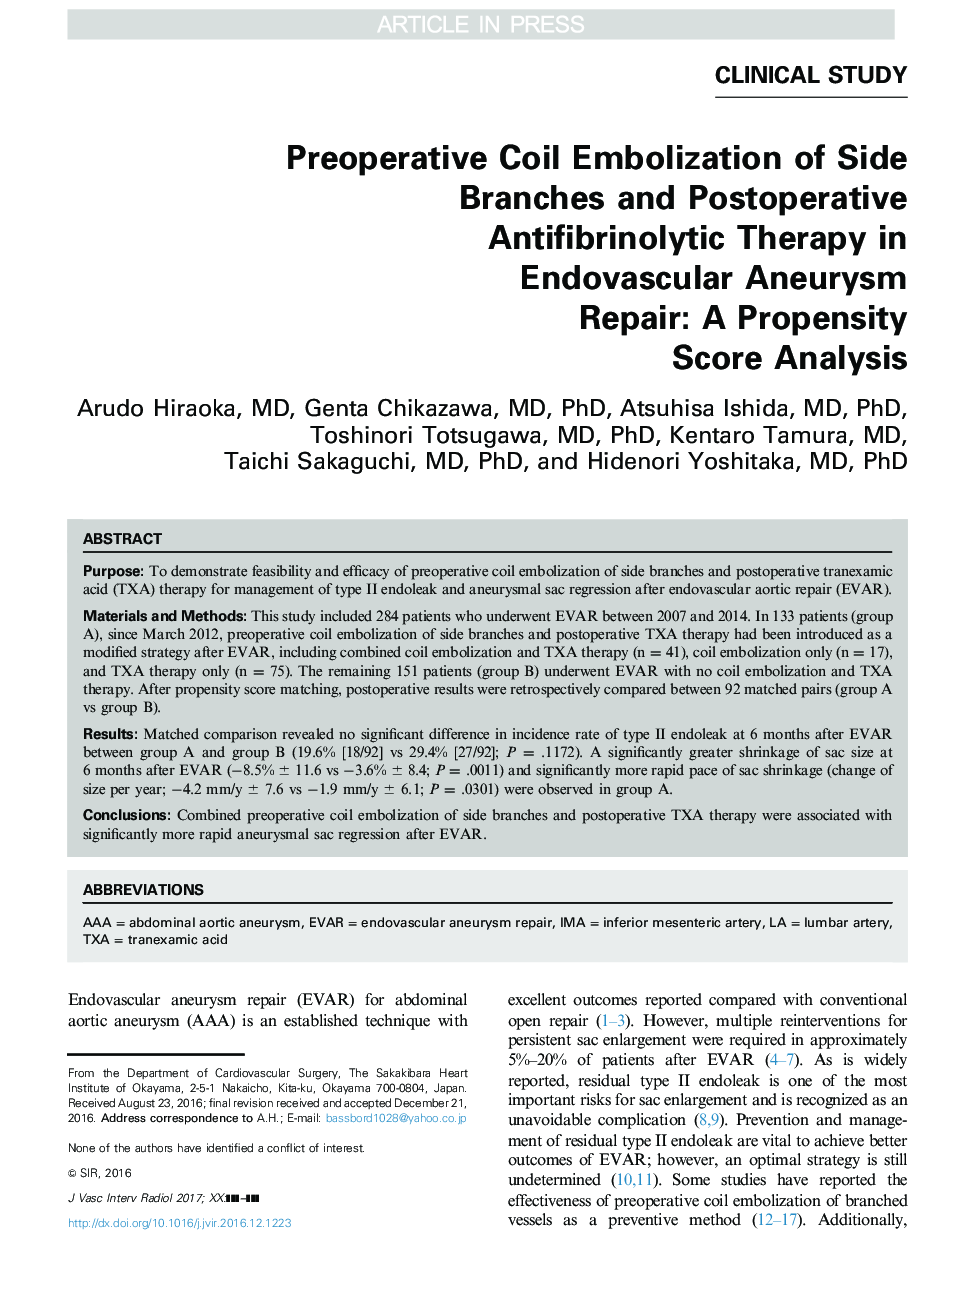 Preoperative Coil Embolization of Side Branches and Postoperative Antifibrinolytic Therapy in Endovascular Aneurysm Repair: A Propensity Score Analysis